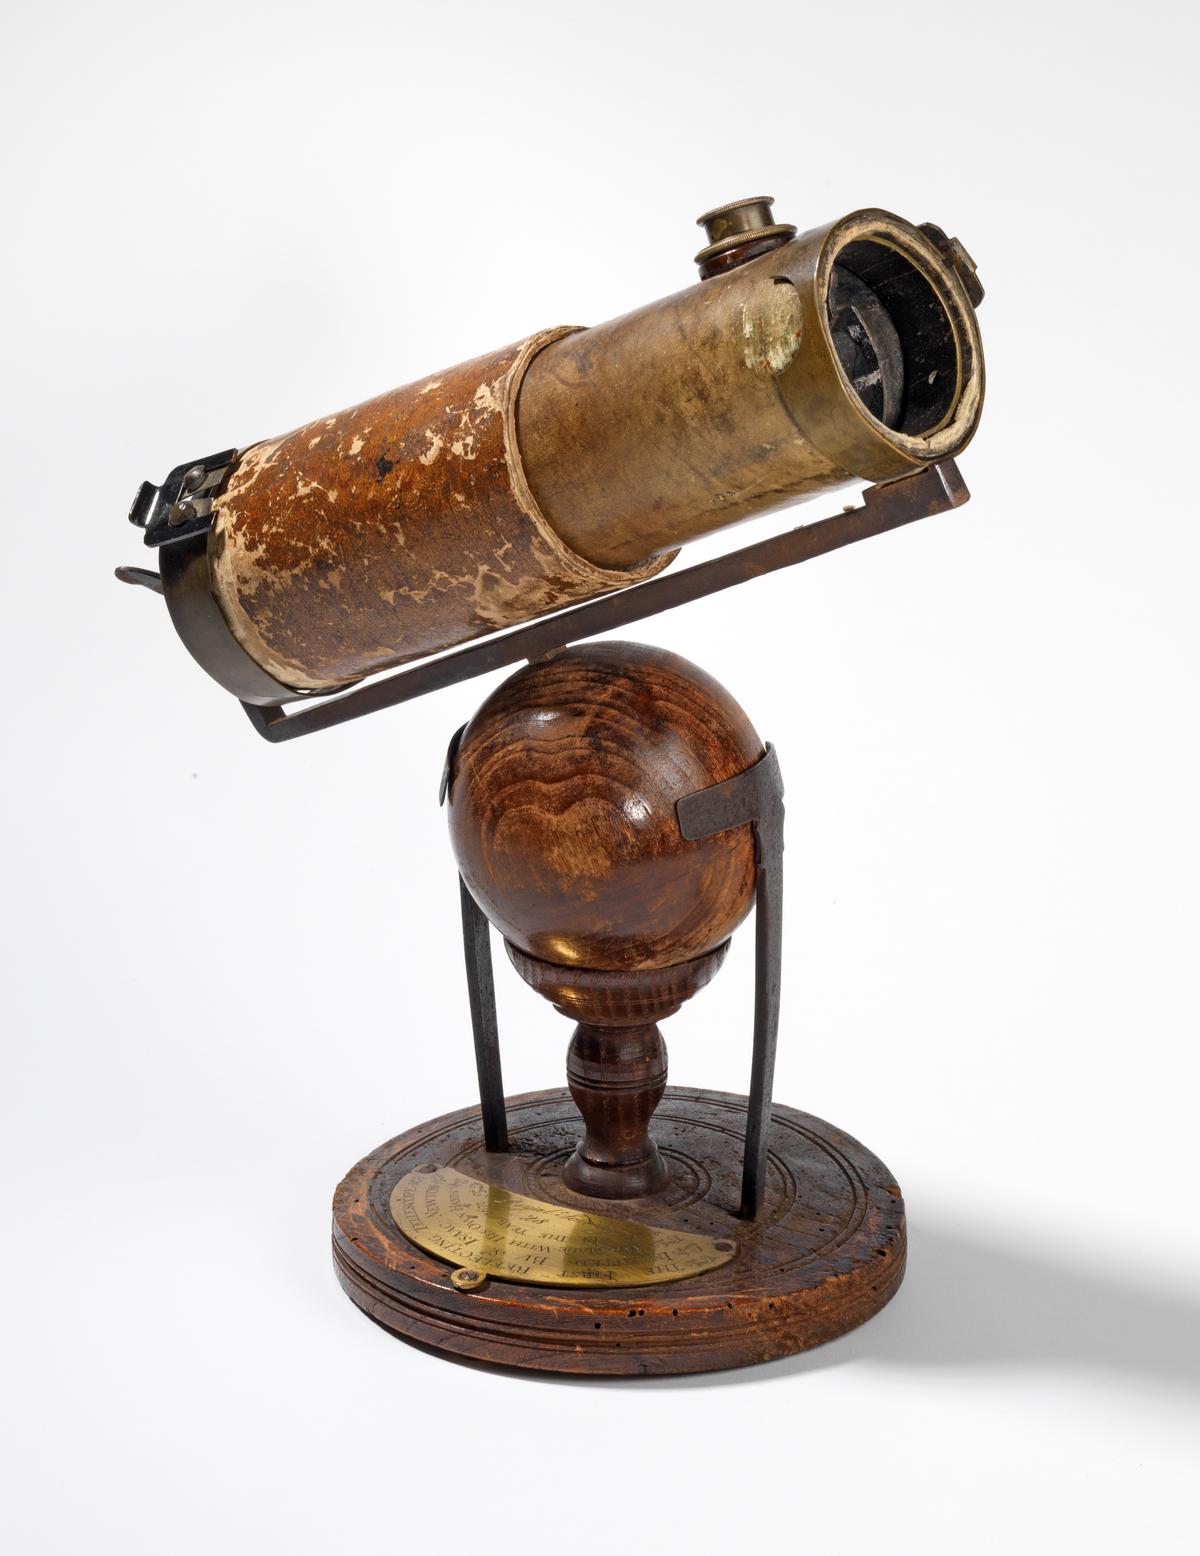 Sir Isaac Newton's reflective telescope from 1671 / Royal Society collections